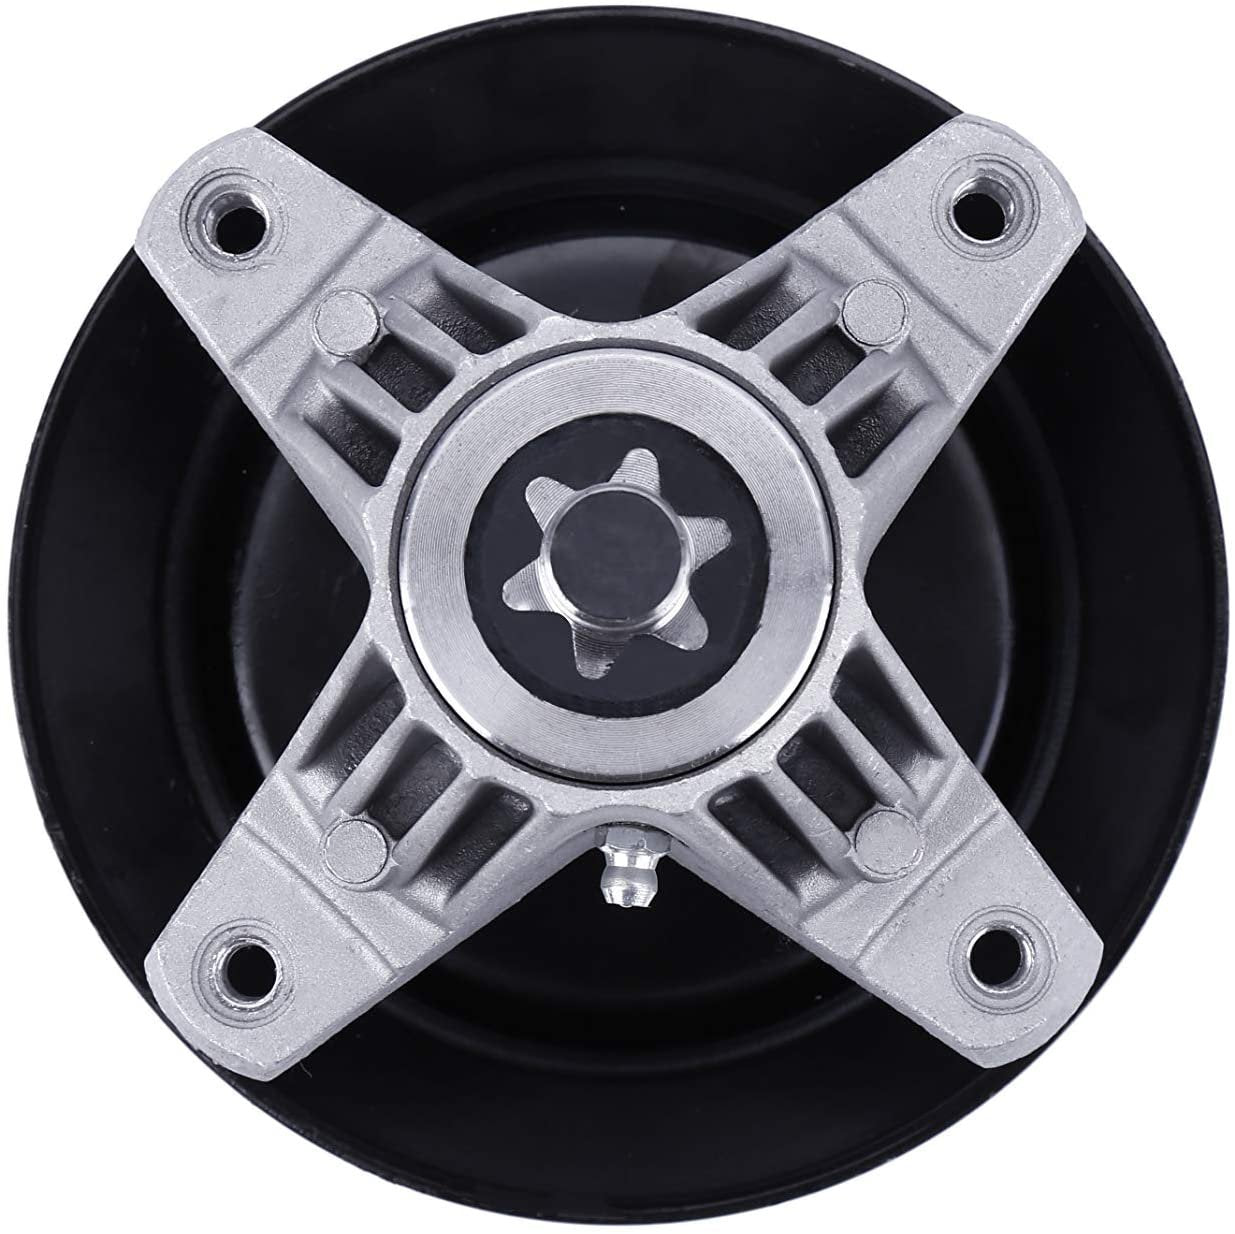 Replacement Spindle Assembly with Pulley - Compatible with MTD, Troy-Bilt and Cub Cadet 42 Inch Deck Lawn Mowers - Replaces 918-04822B, 618-04822, 618-04822A, 618-04822B, 918-04889, 918-04889A